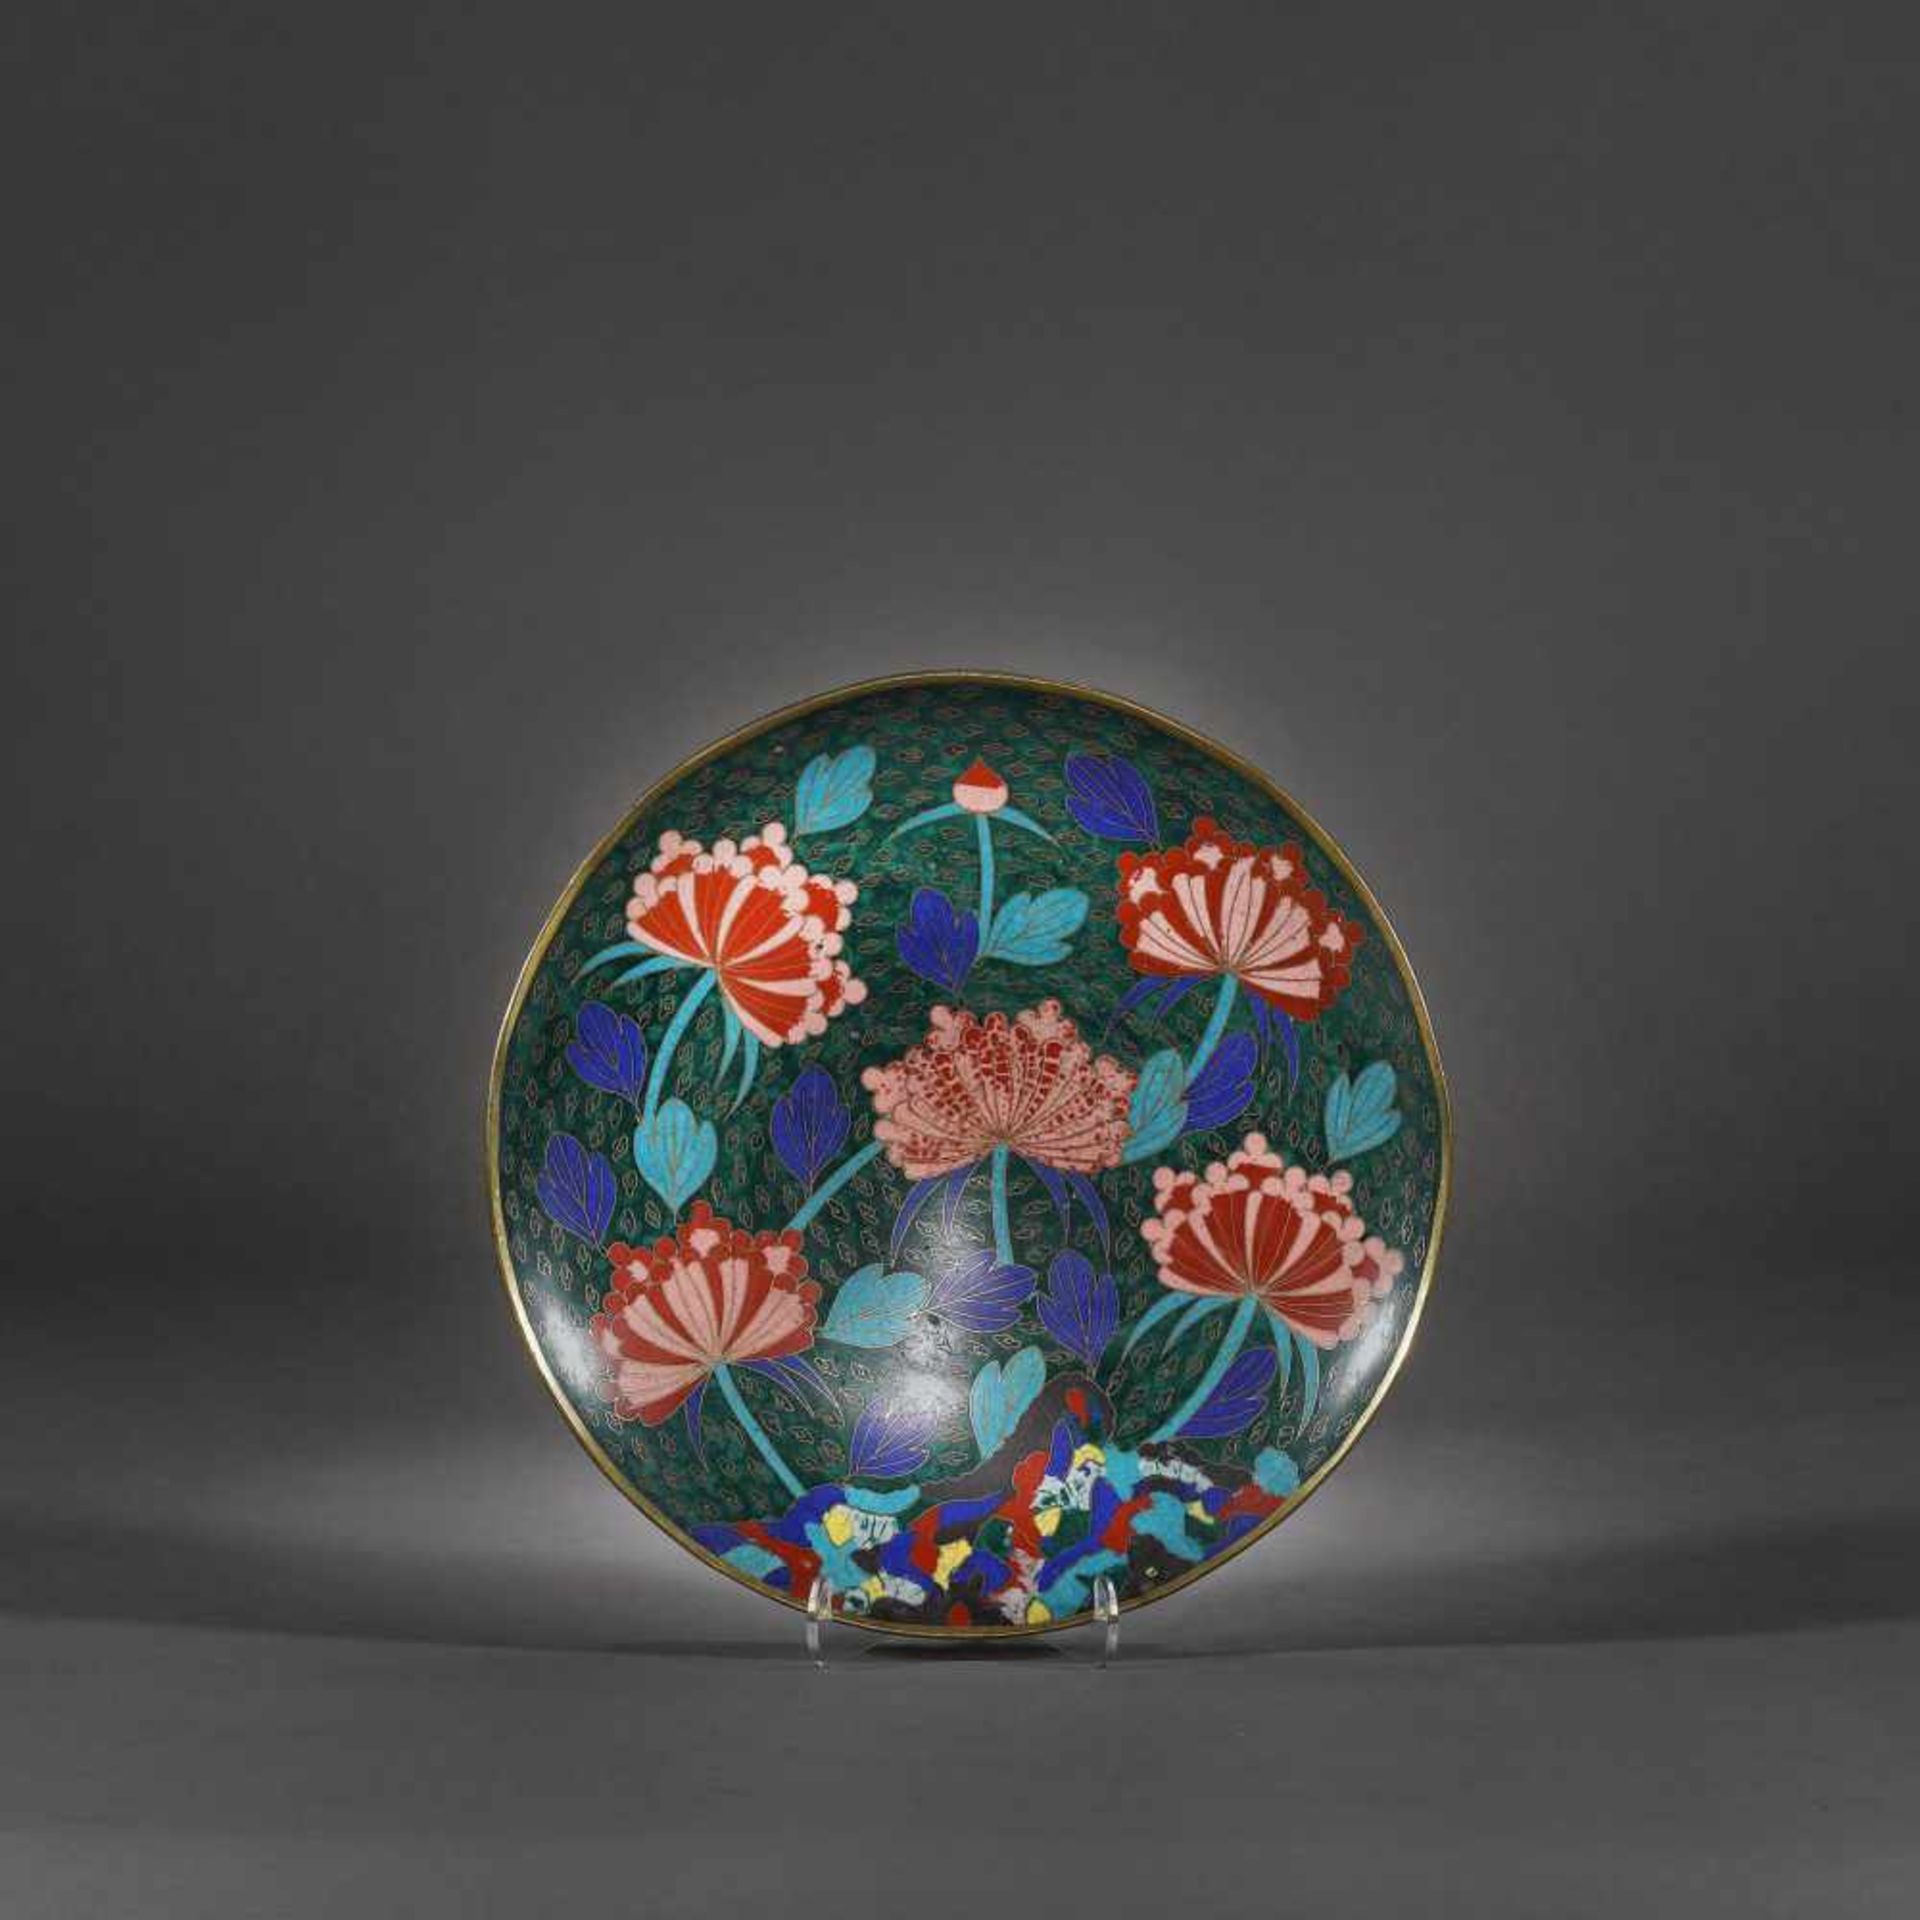 Bronze platter with cloisonné chysanthemum flowers, the Edo Period, Japan, the beginning of the 19th